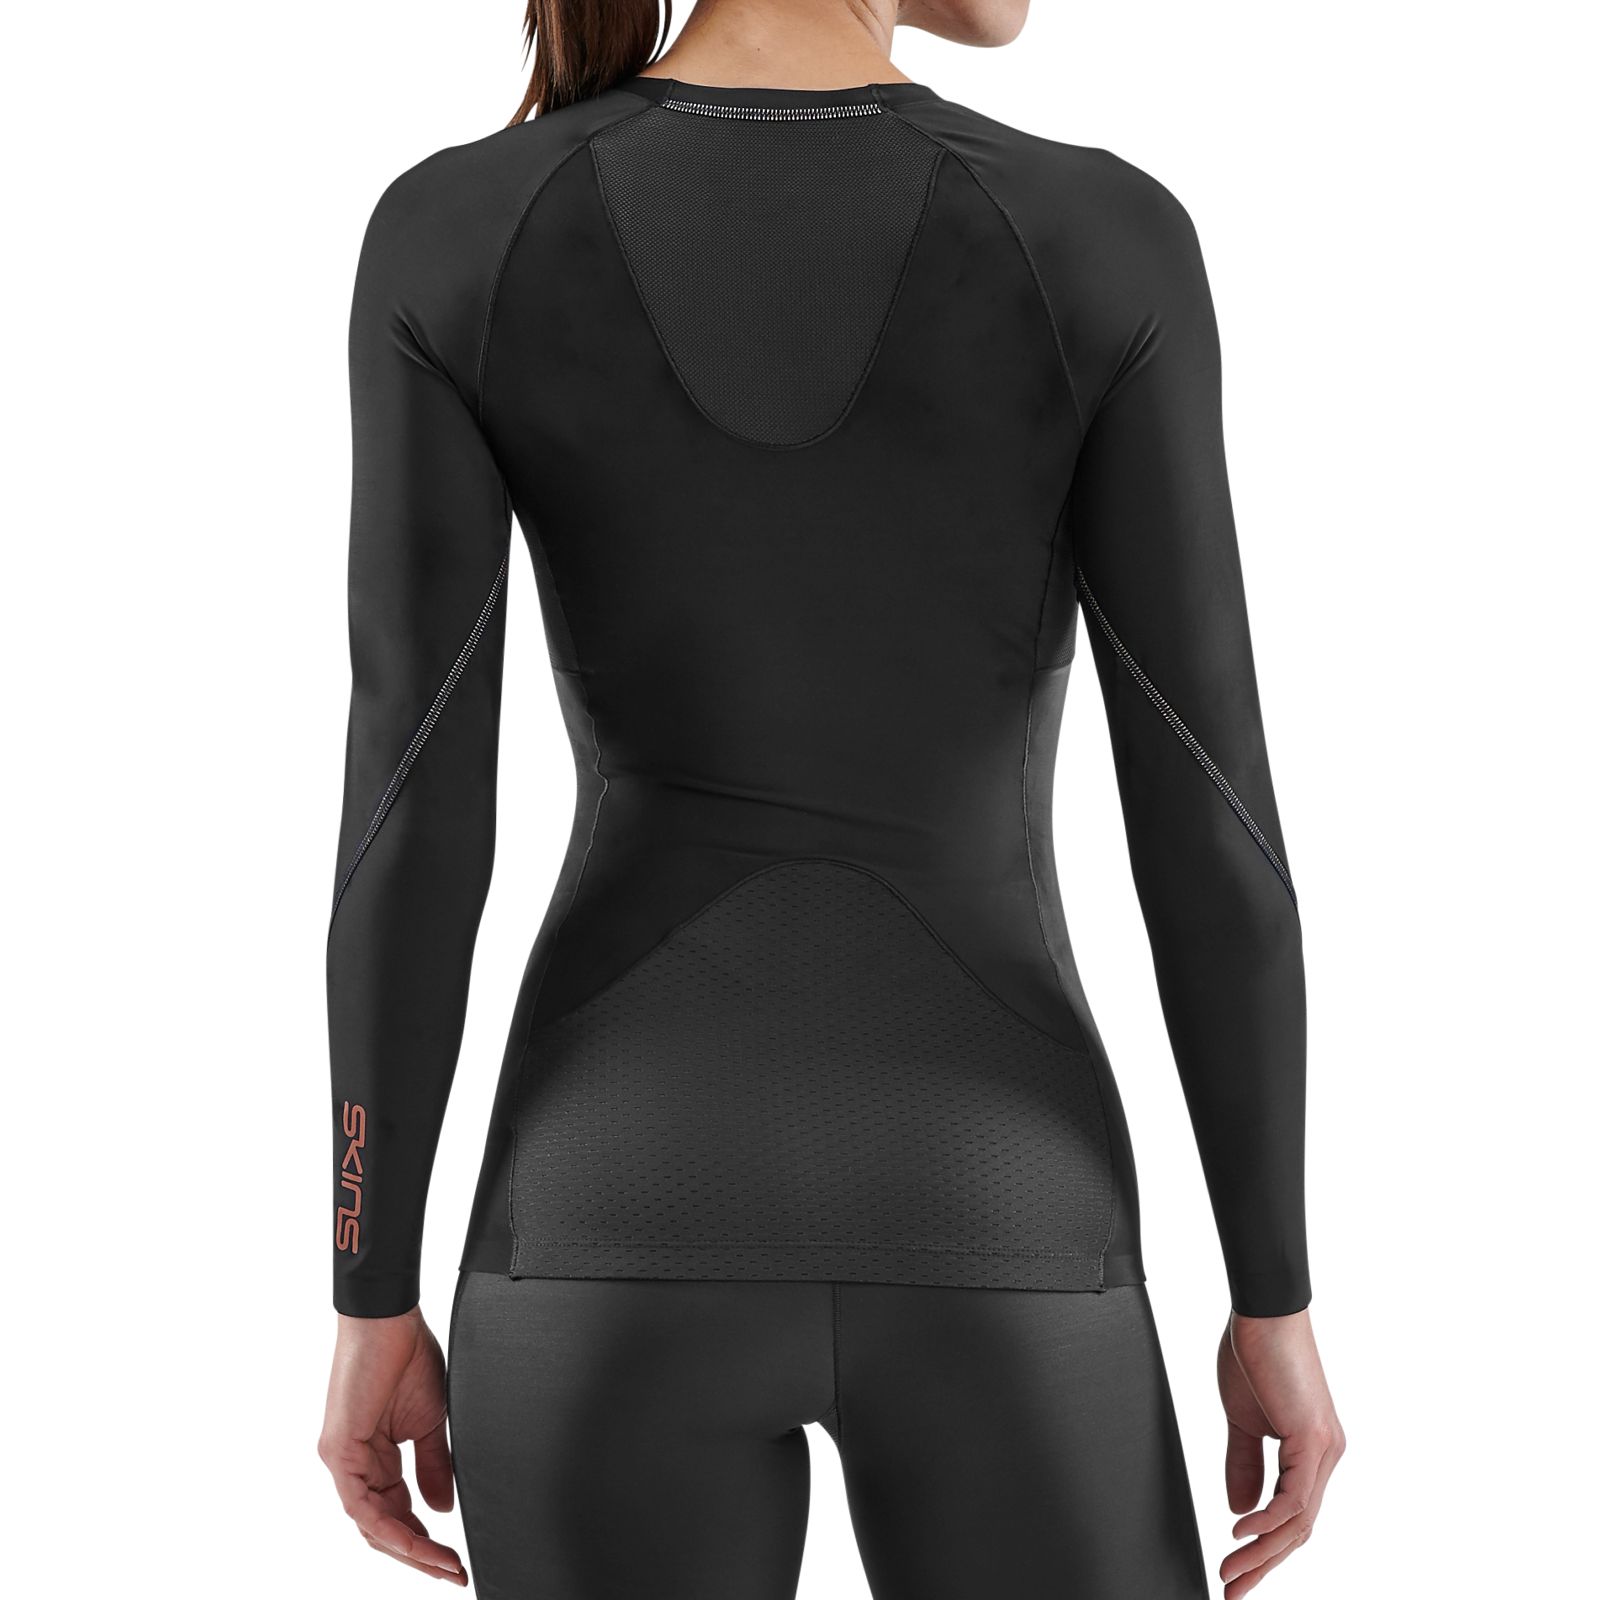  Skins Women's Ry400 Recovery Long Sleeve Top, Black